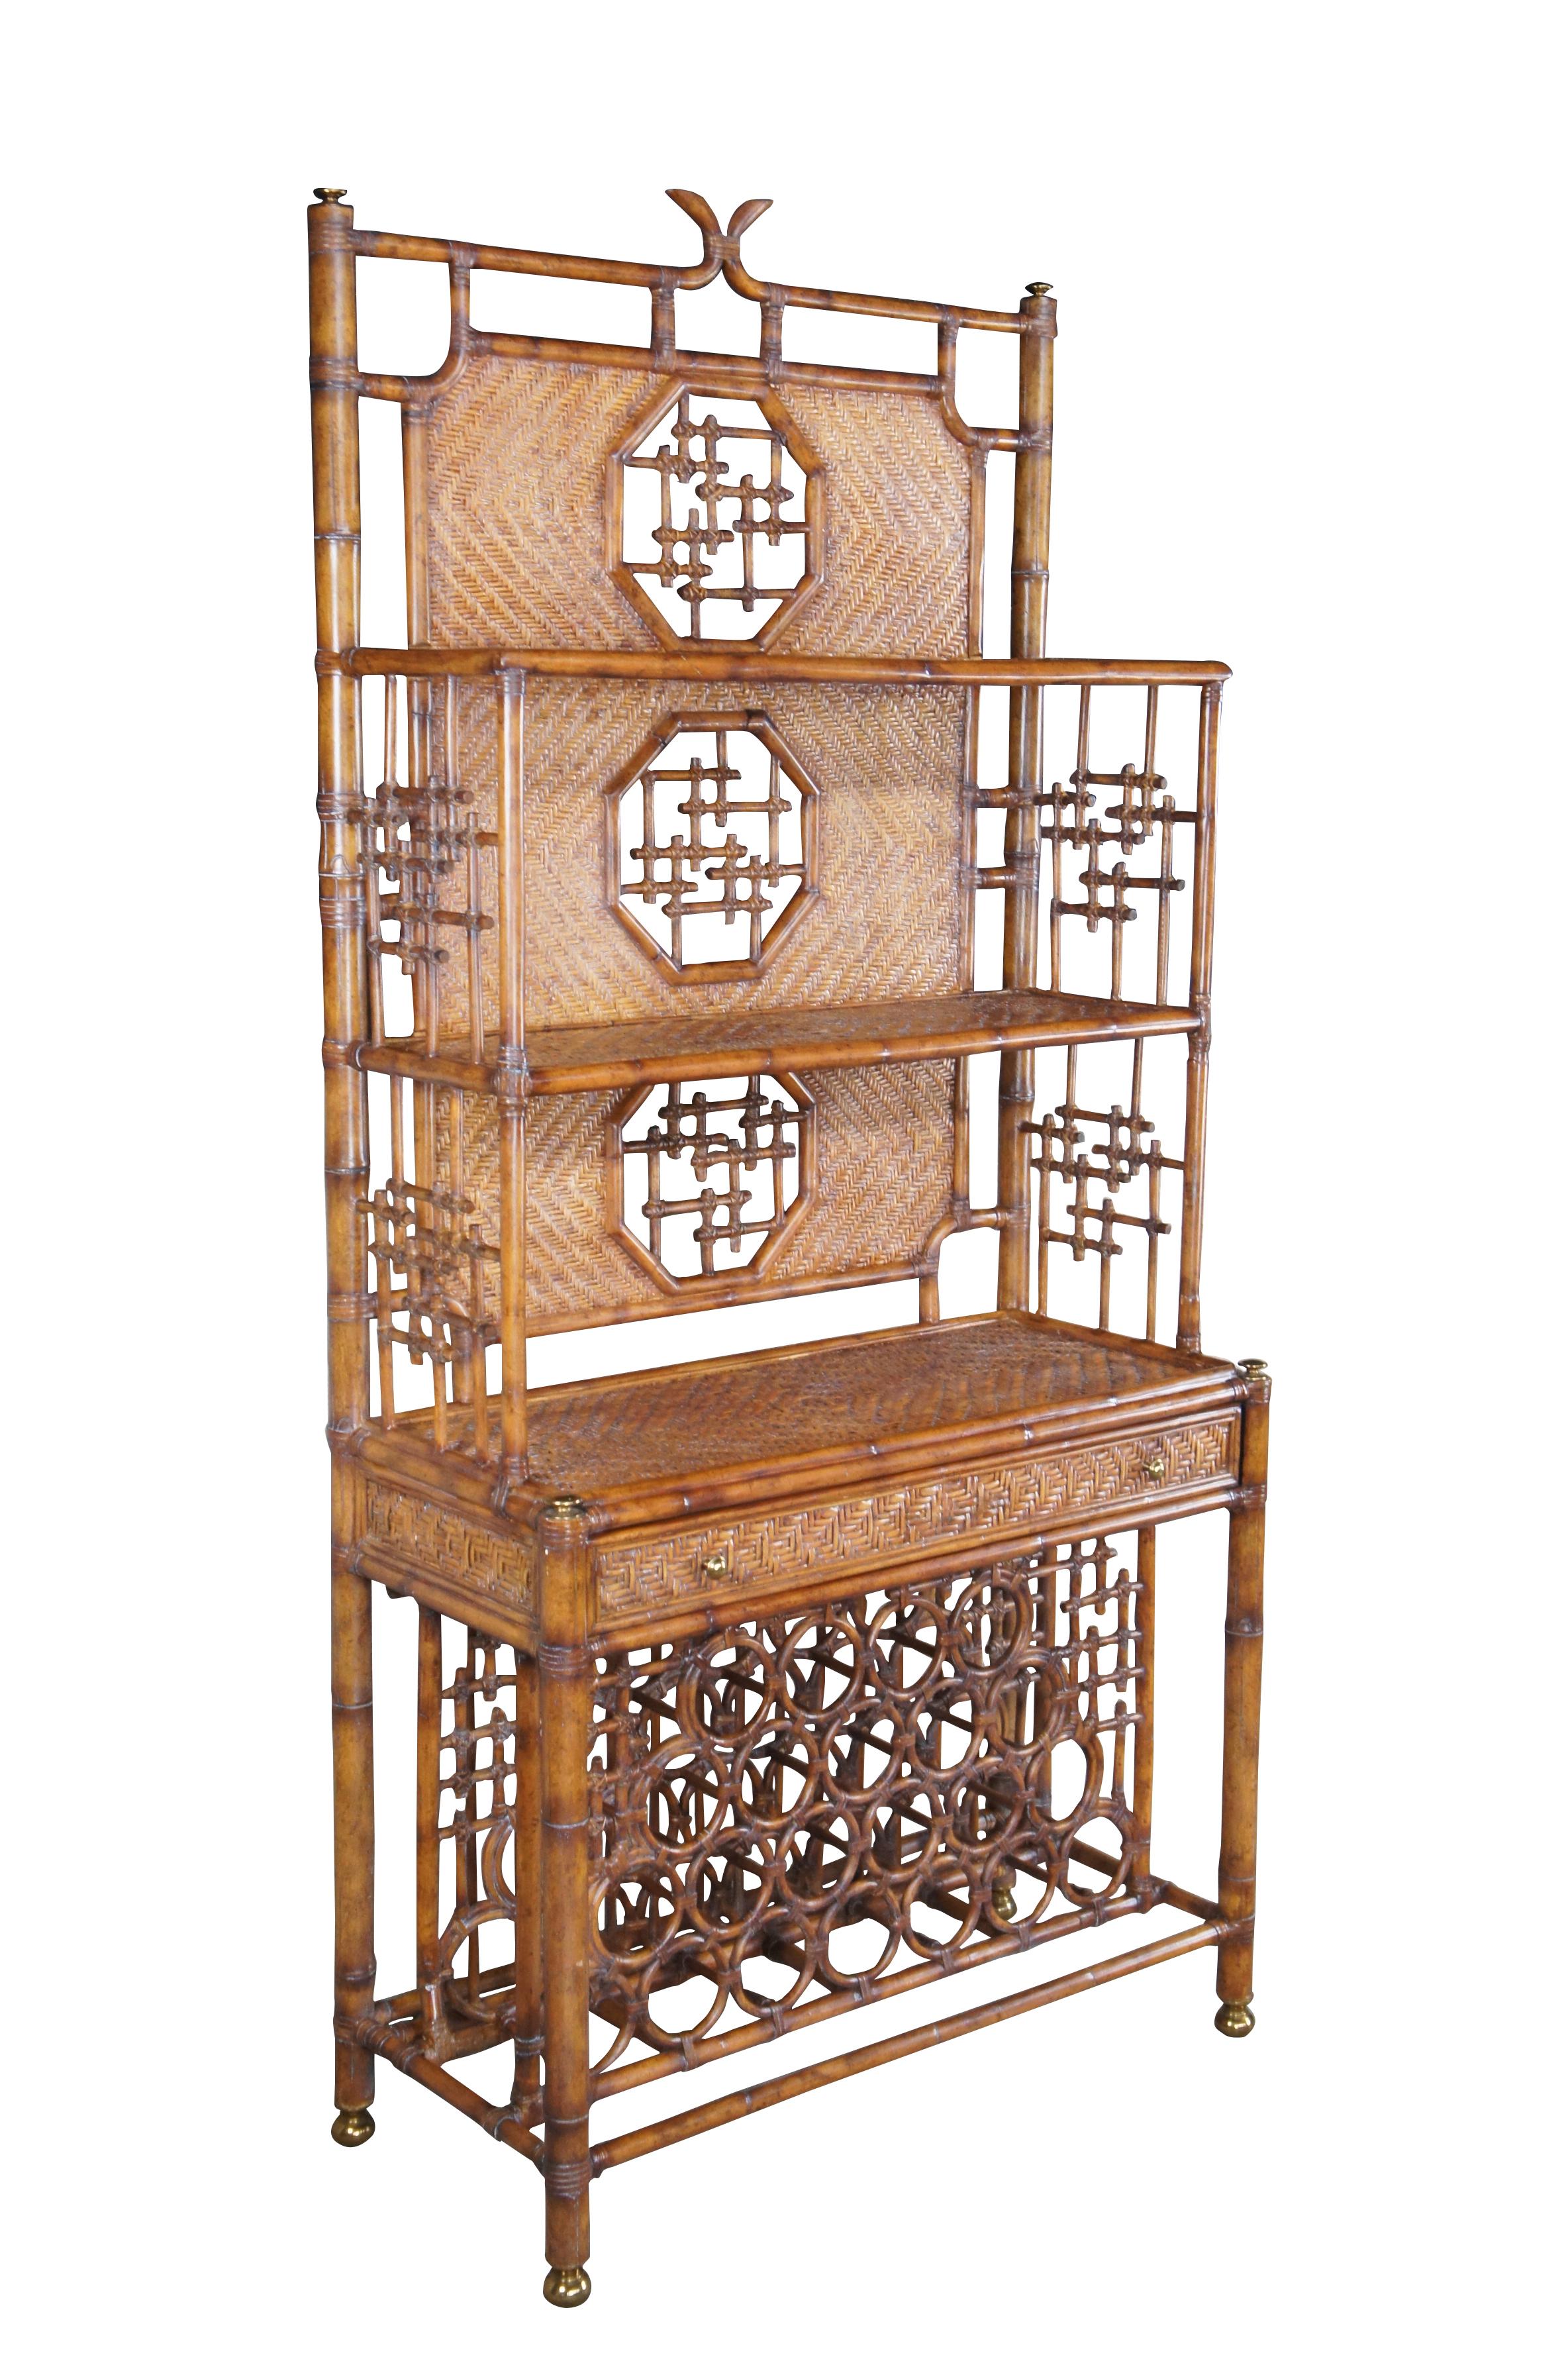 Stately Etagere display or wine dry bar by Maitland Smith, circa 1990s.  Made from faux bamboo and woven rattan with two shelves over a table surface, drawer and lower wine or liquor bottle storage.  Features octagonal windows along the back with